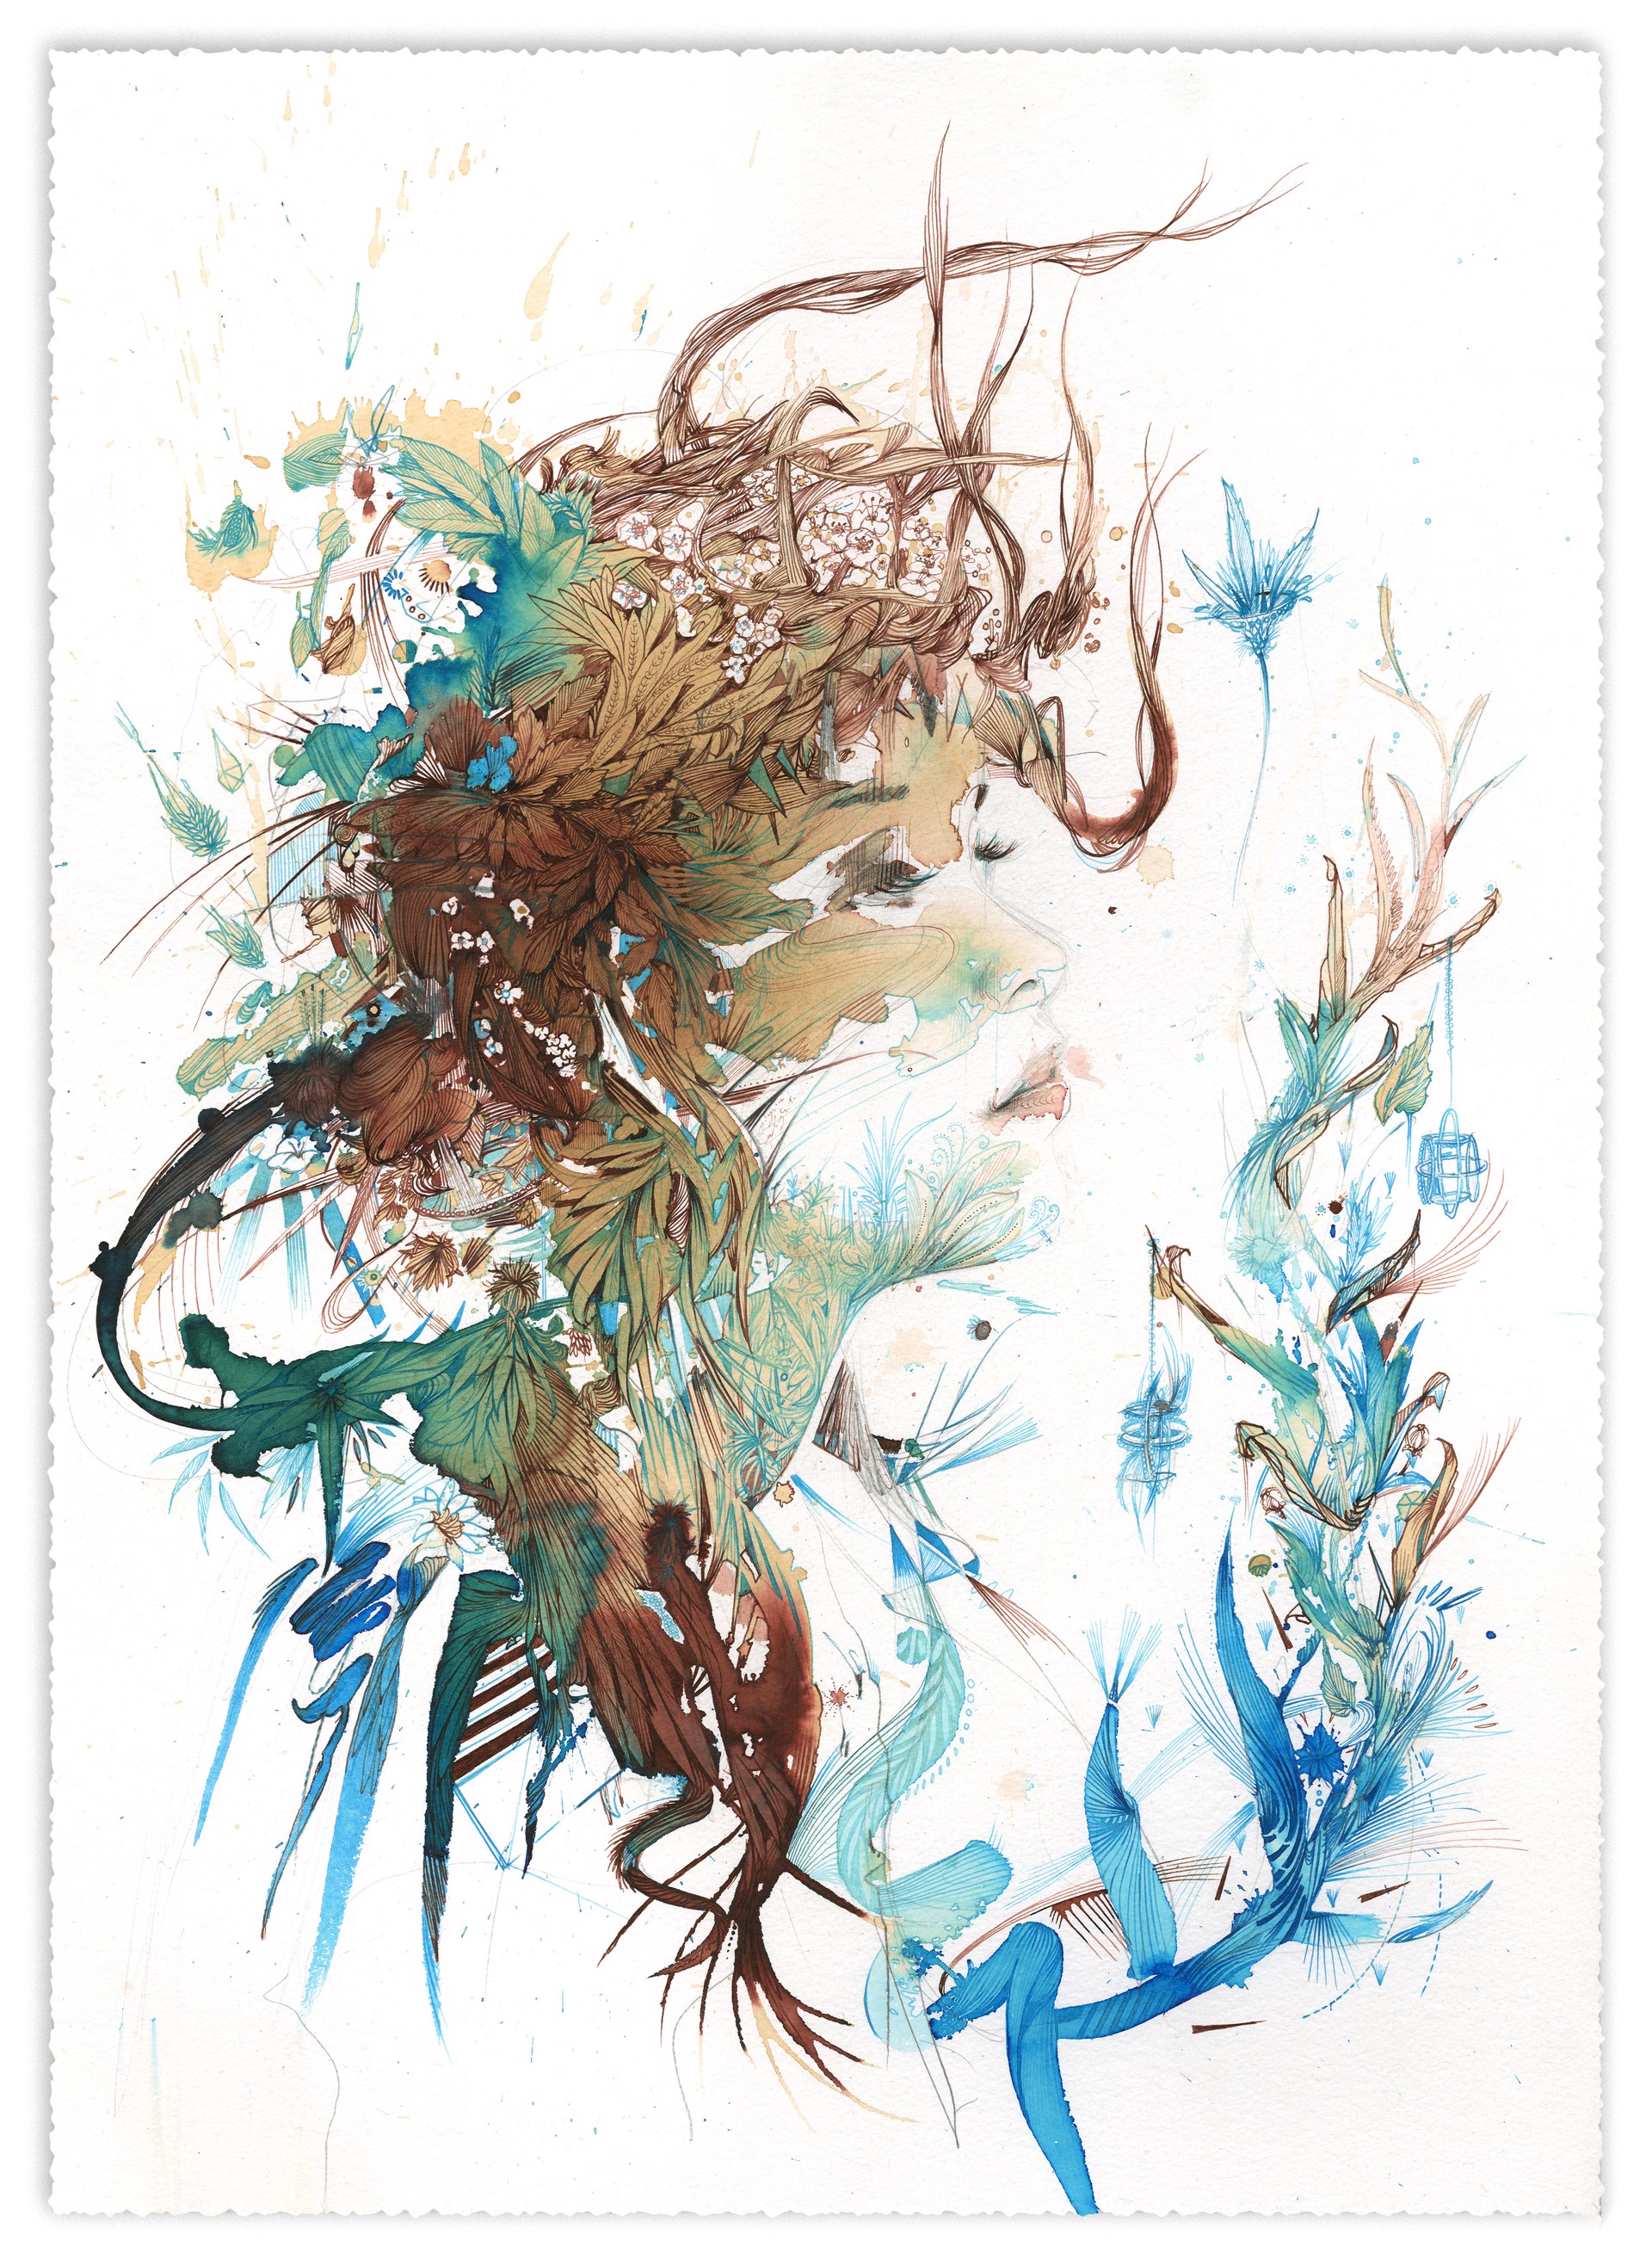 Reverie by Carne Griffiths